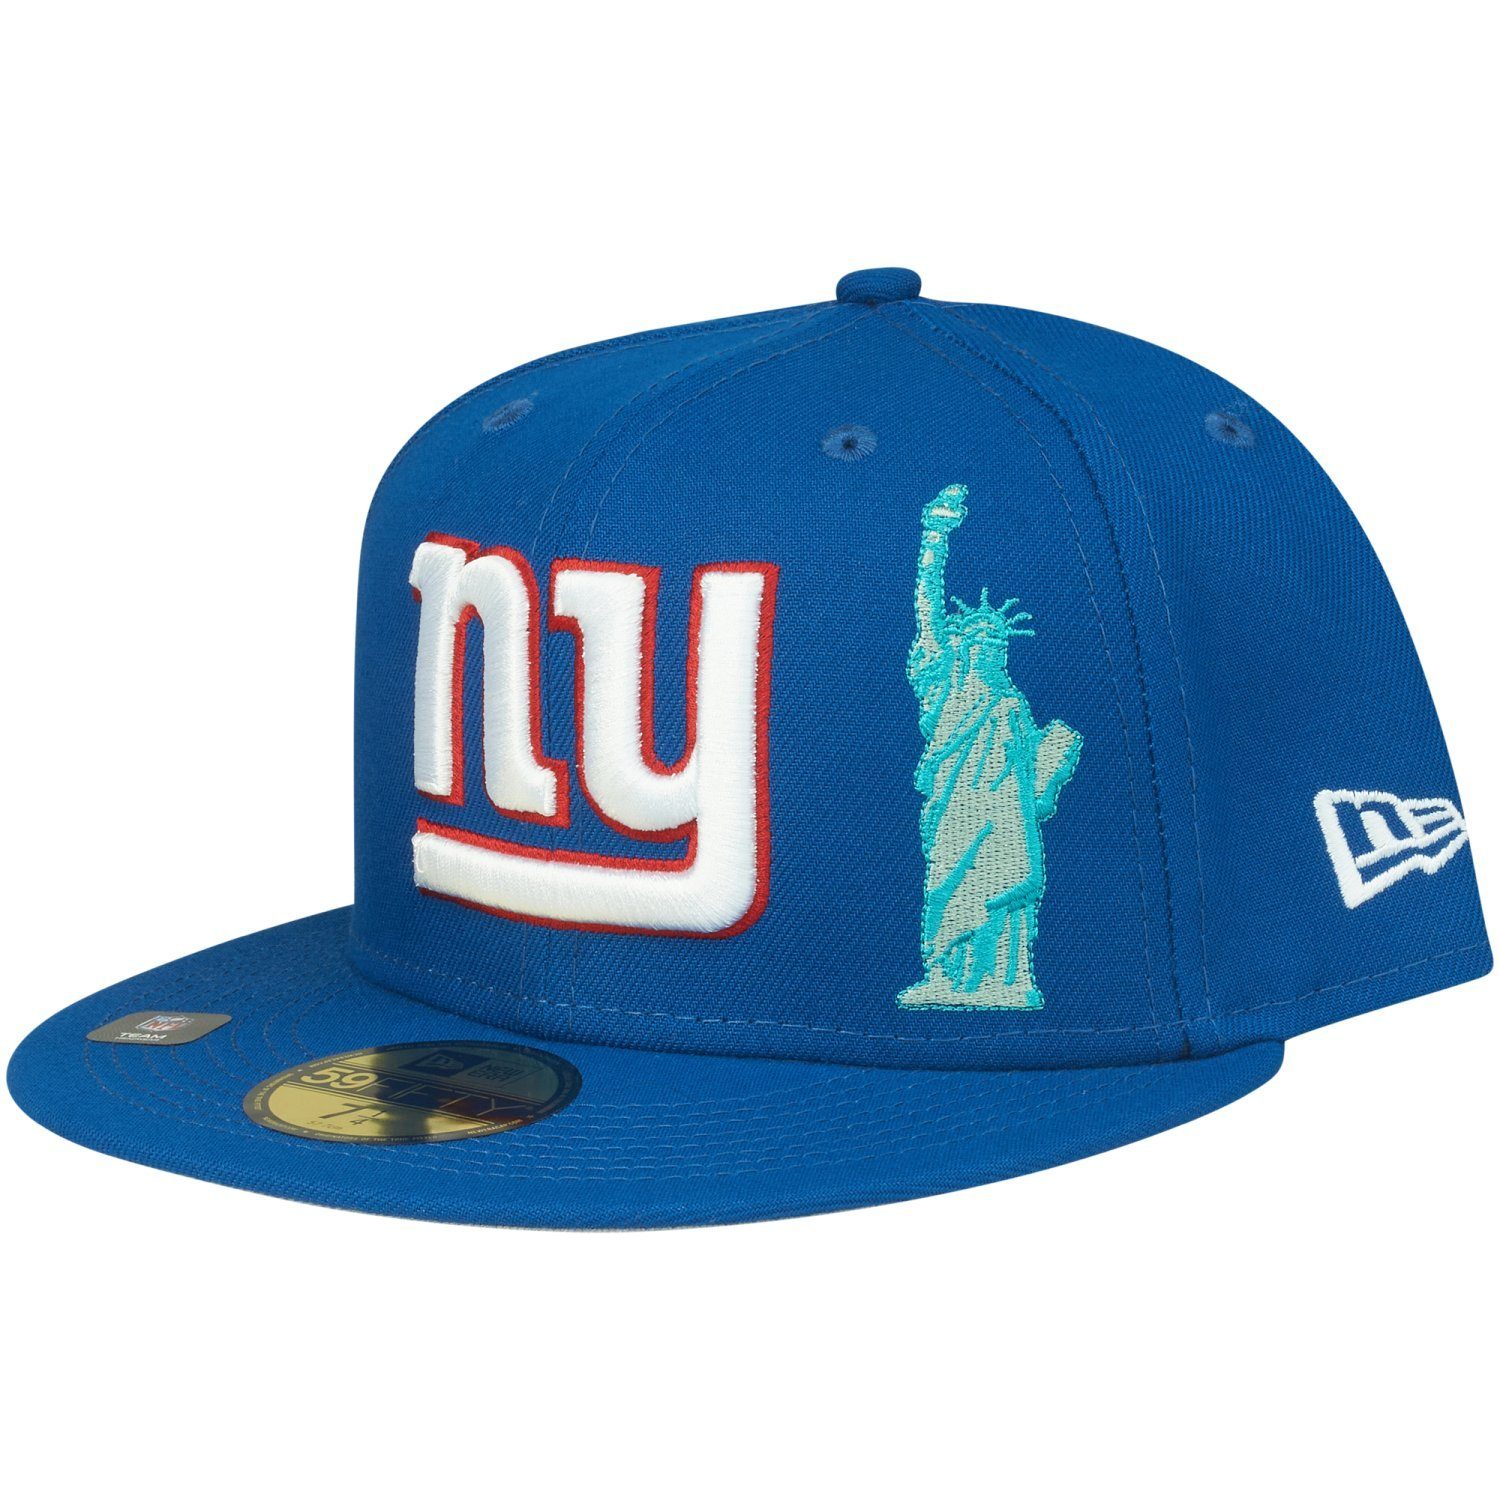 New Era Fitted Cap 59Fifty NFL CITY New York Giants